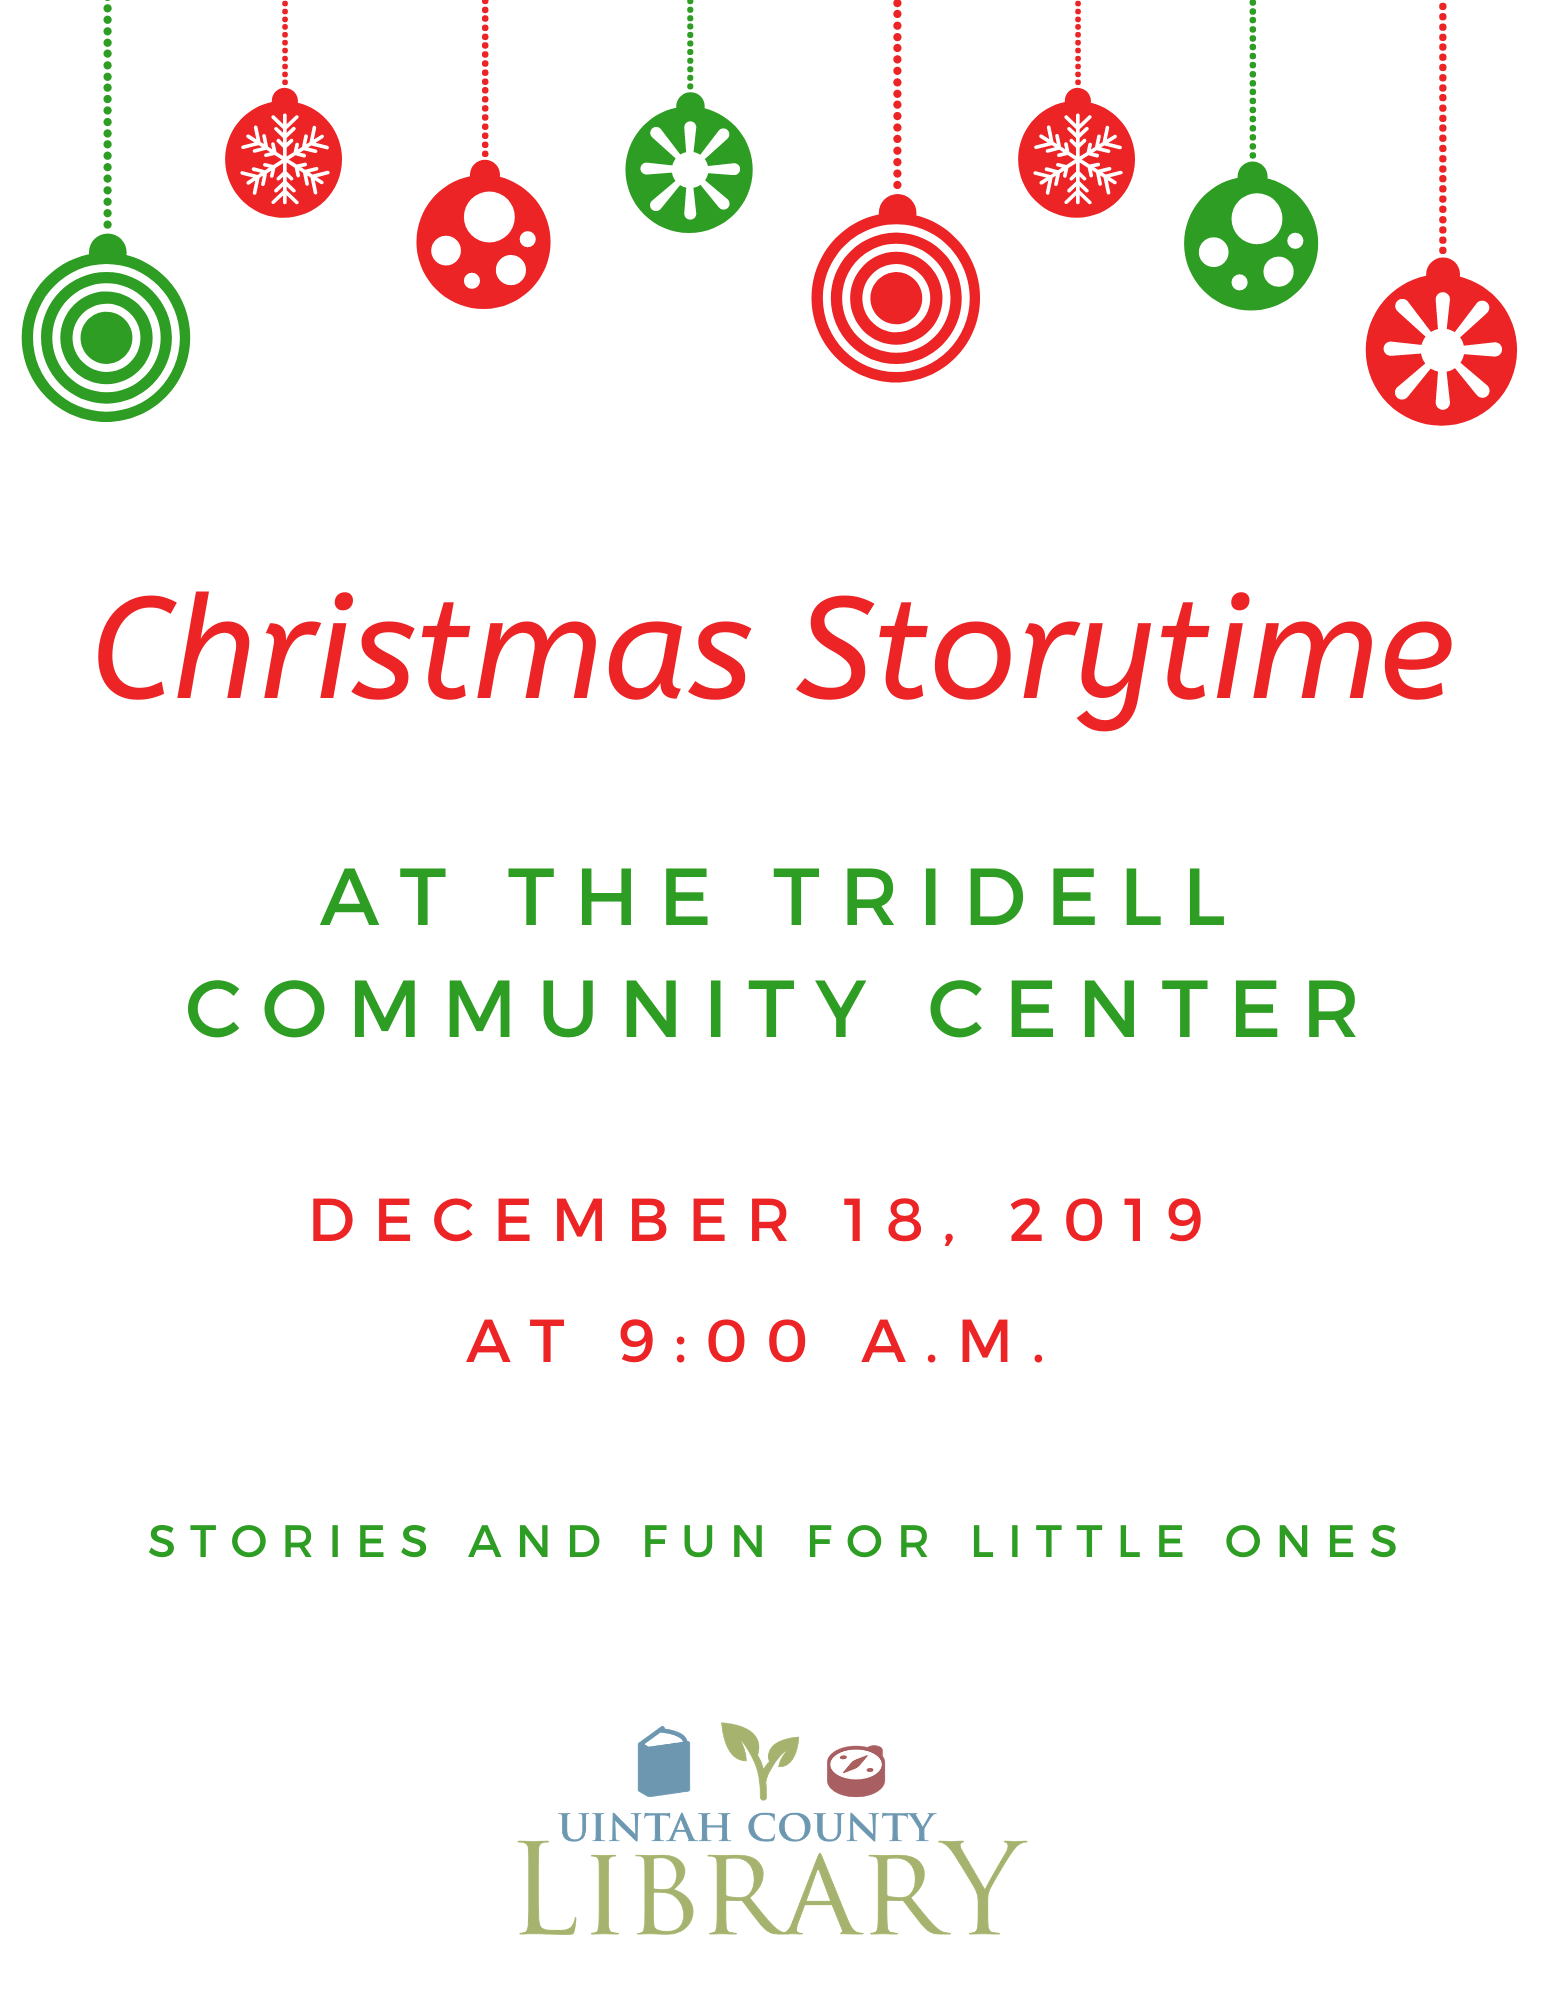 Christmas Storytime at the Tridell Community Center December 18, 2019 at 9:00 a.m. Stories and fun for little ones. 